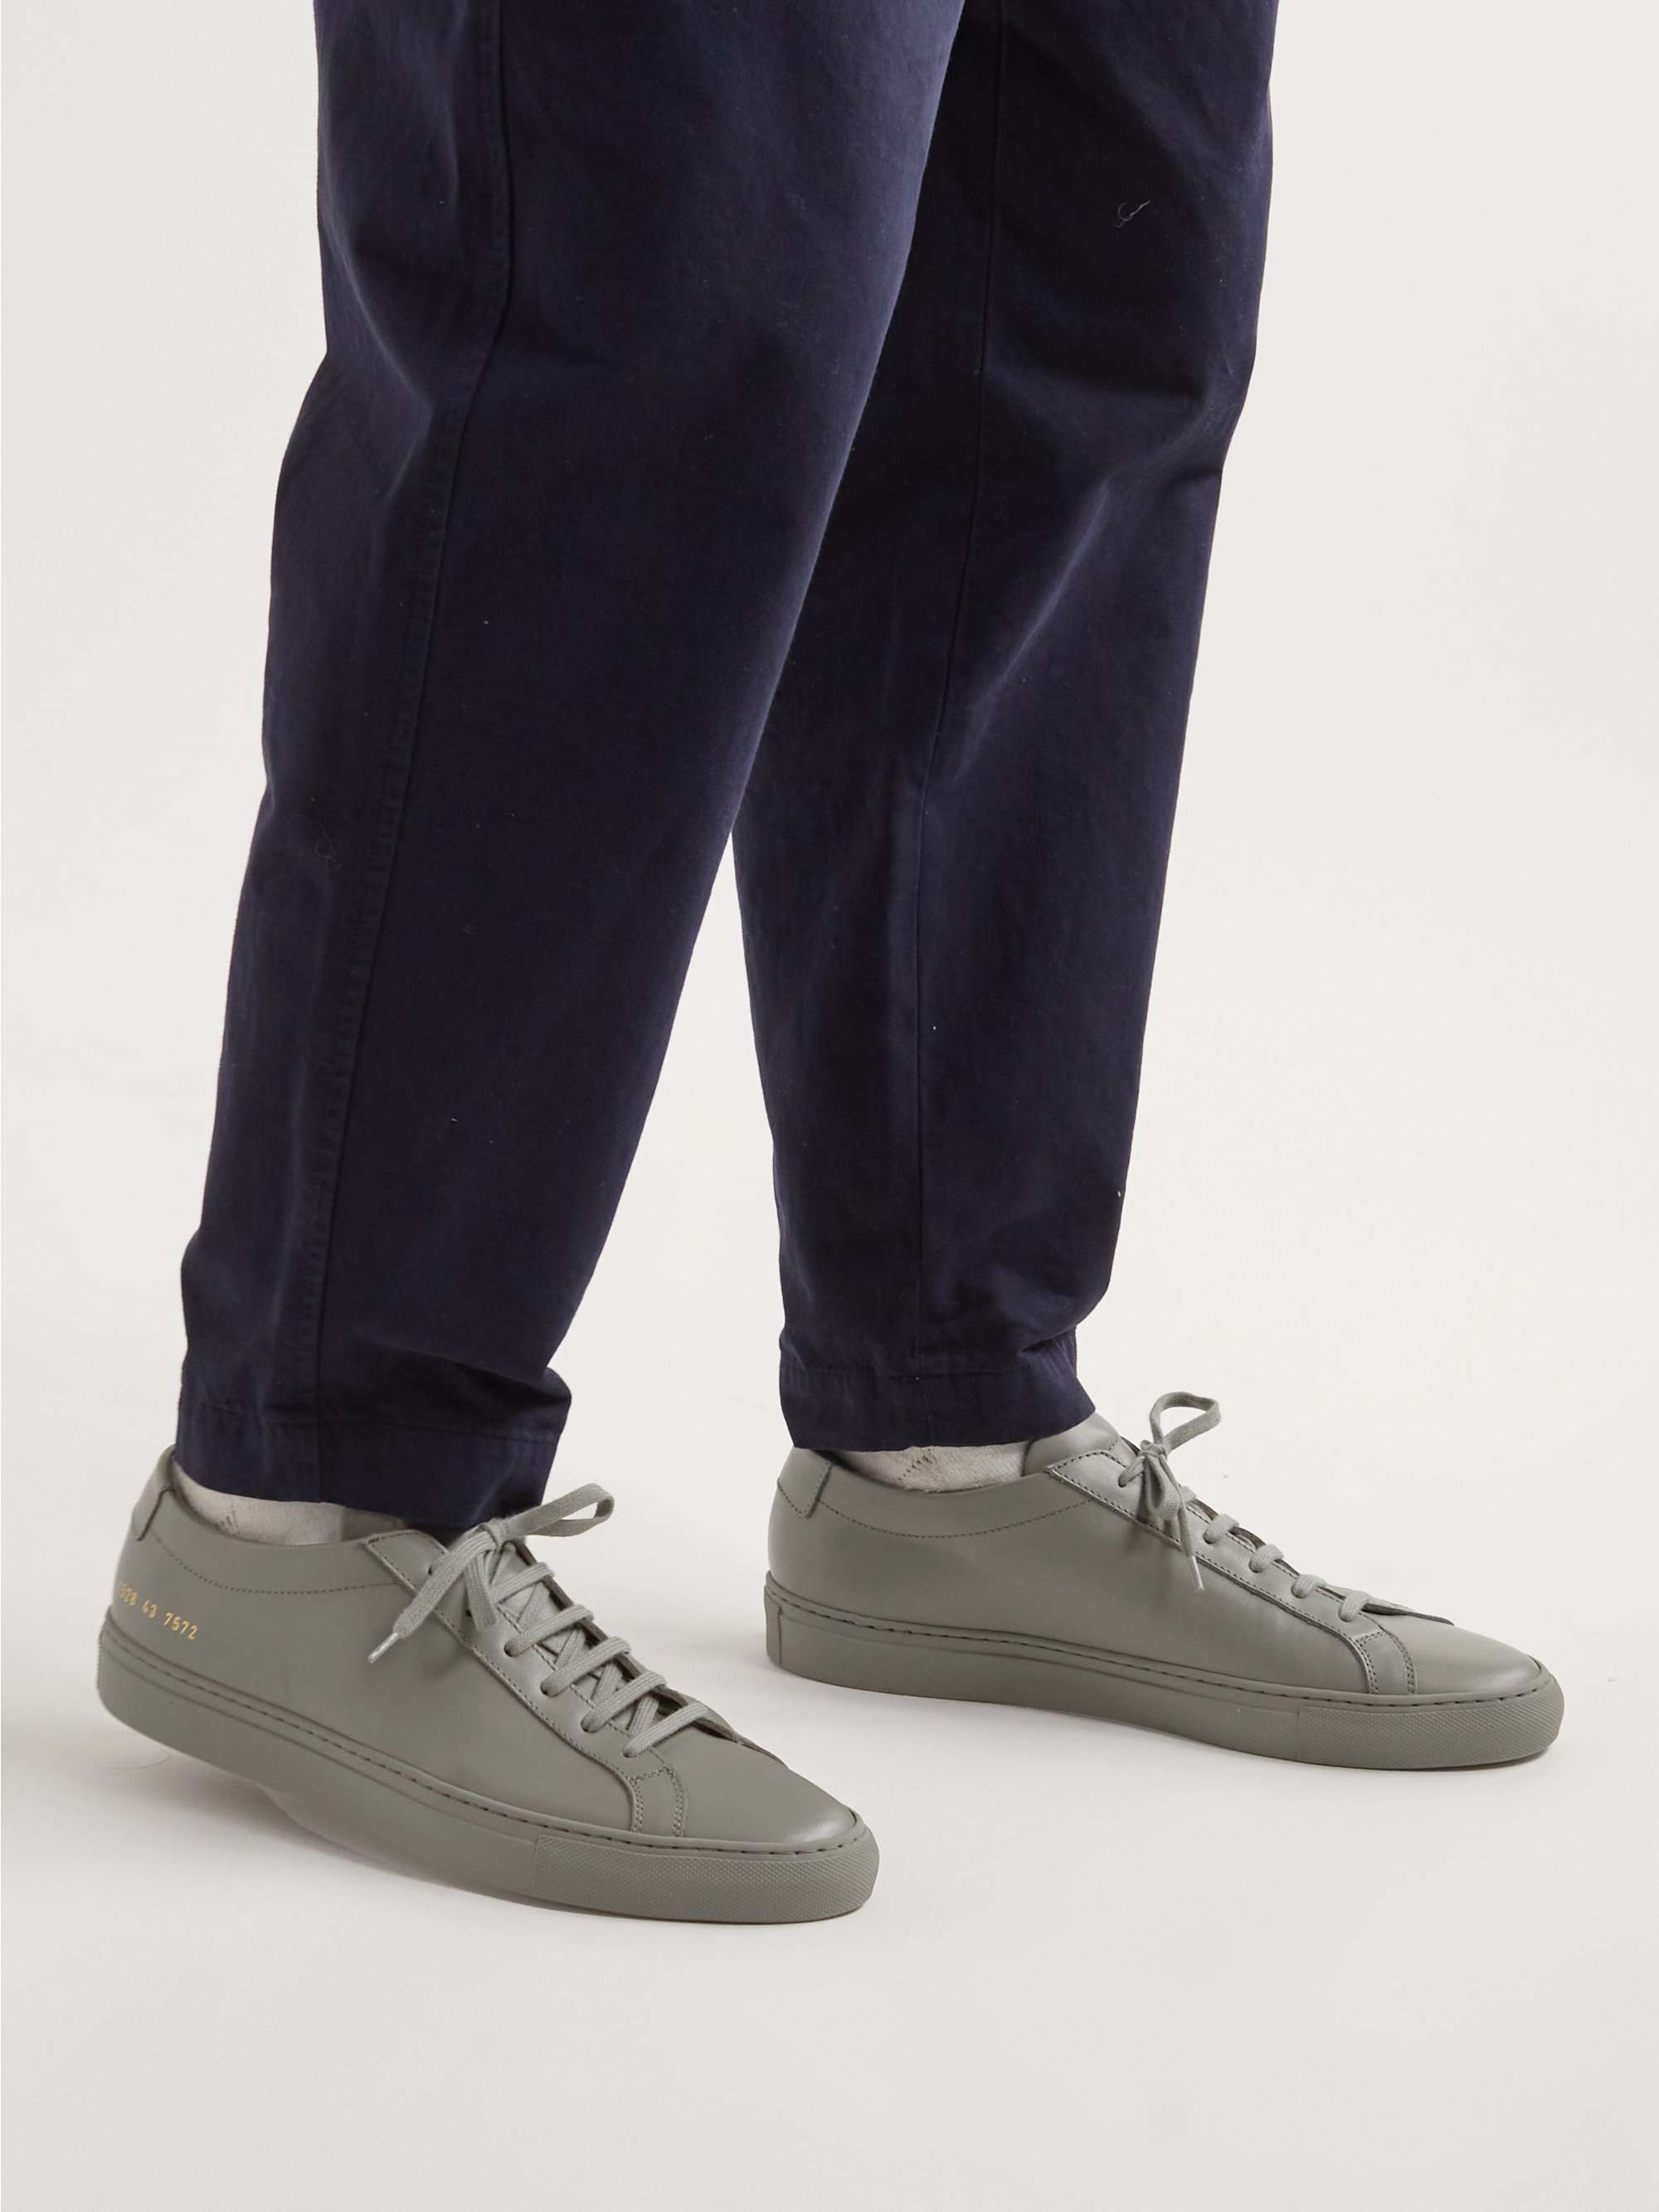 Navy Original Achilles Leather Sneakers | COMMON PROJECTS | MR PORTER